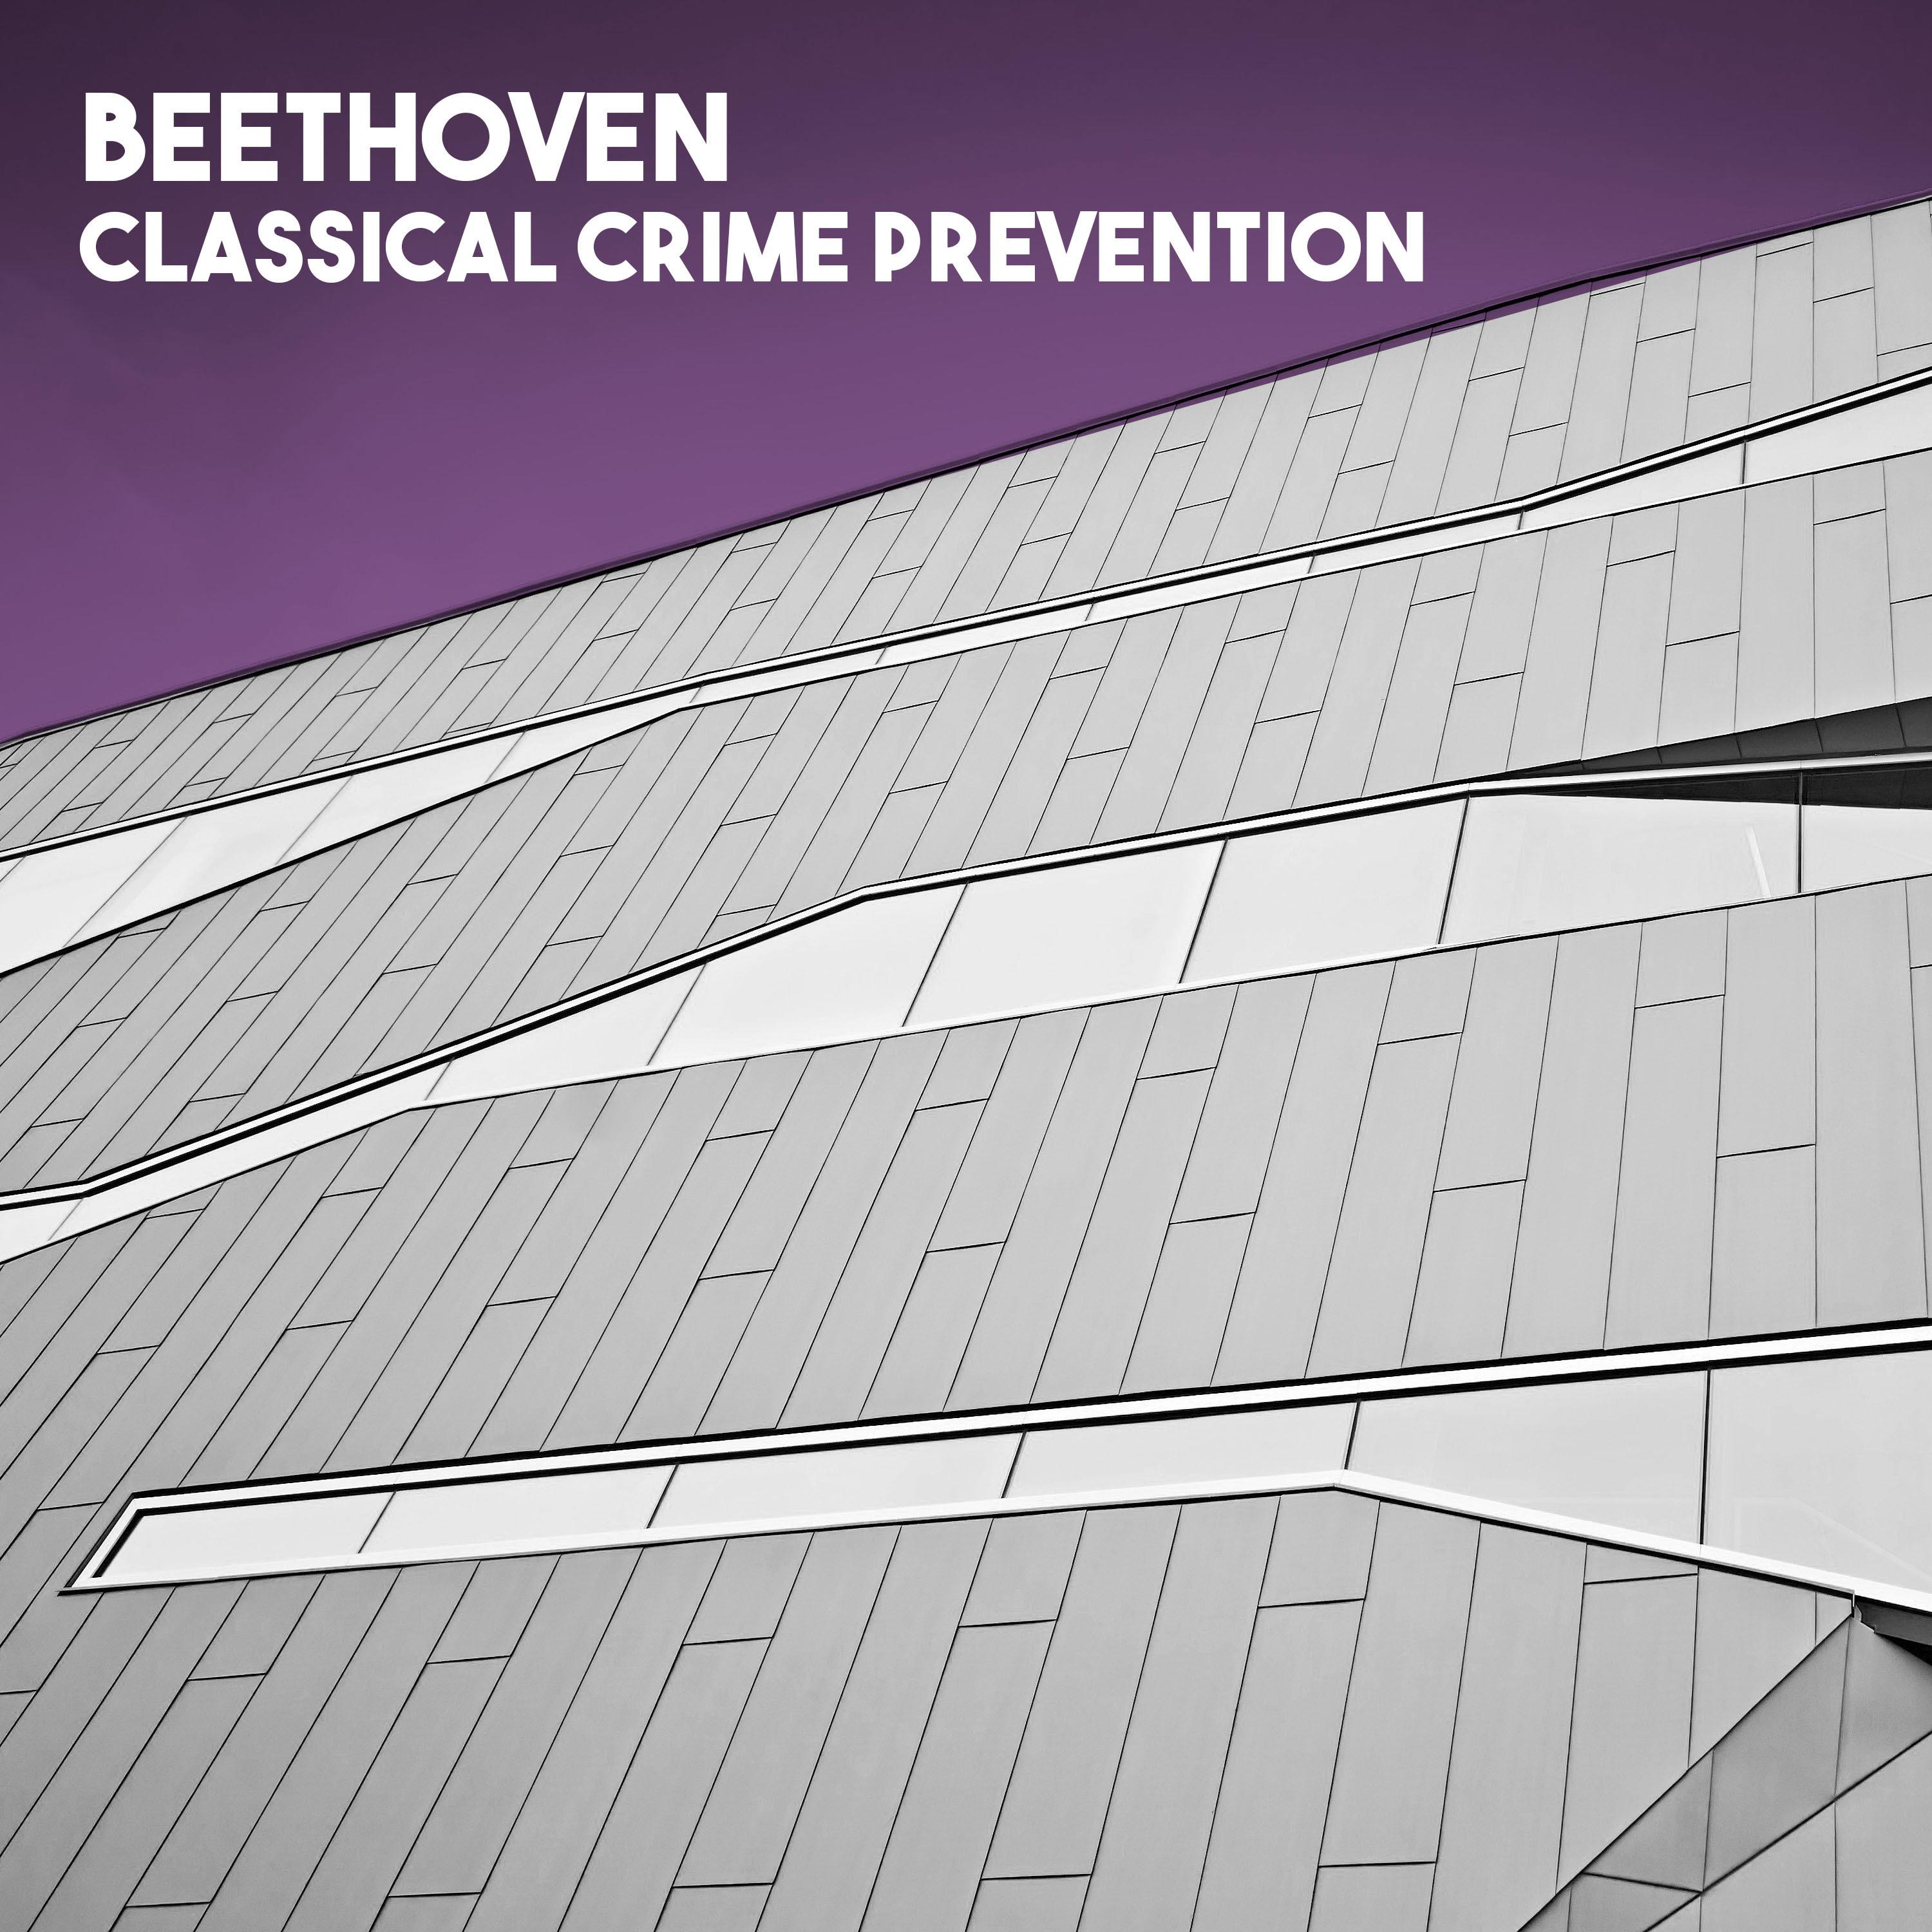 Beethoven: Classical Crime Prevention